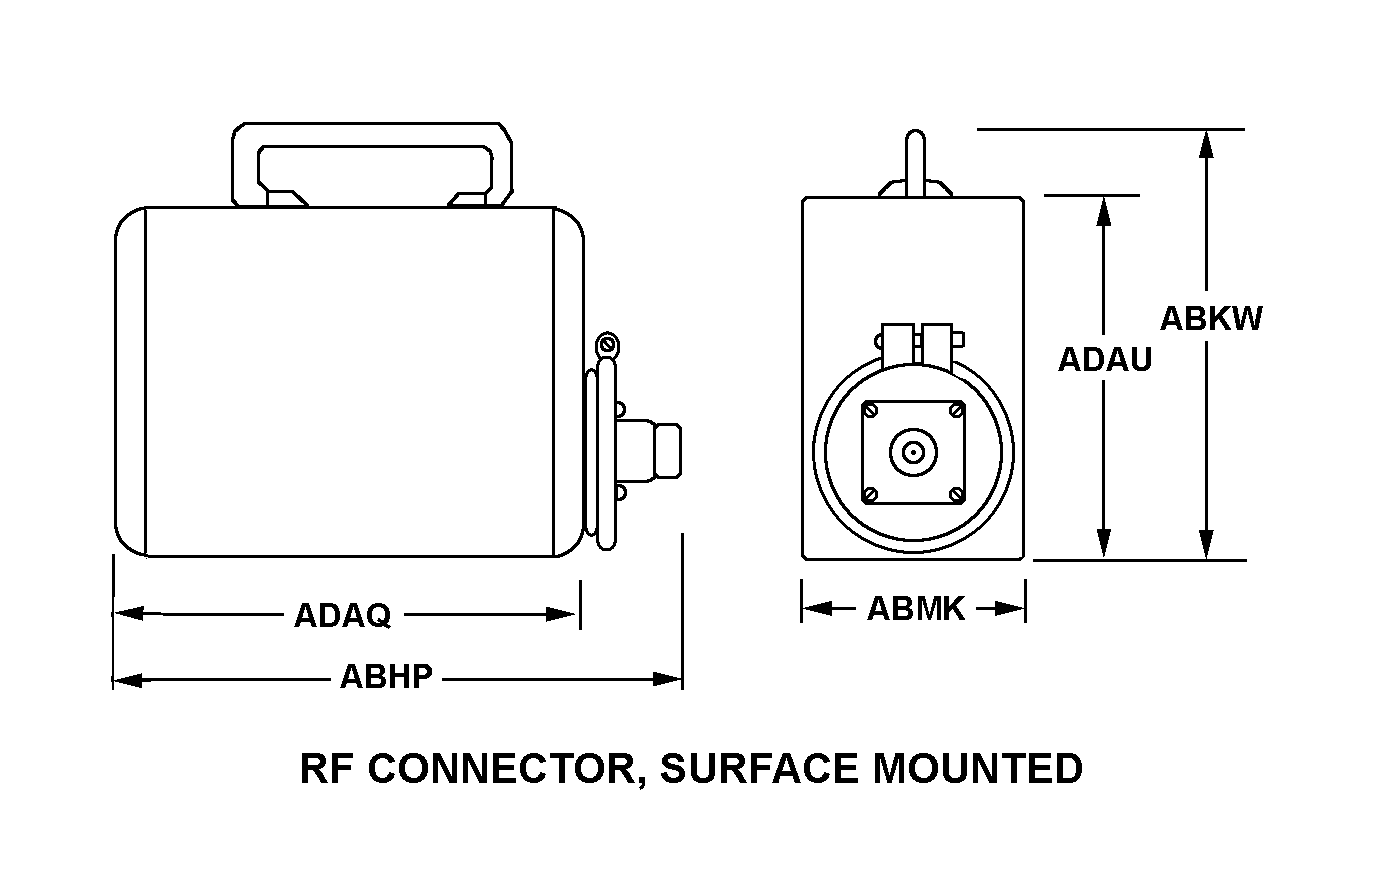 RF CONNECTOR, SURFACE MOUNTED style nsn 5985-01-332-2262